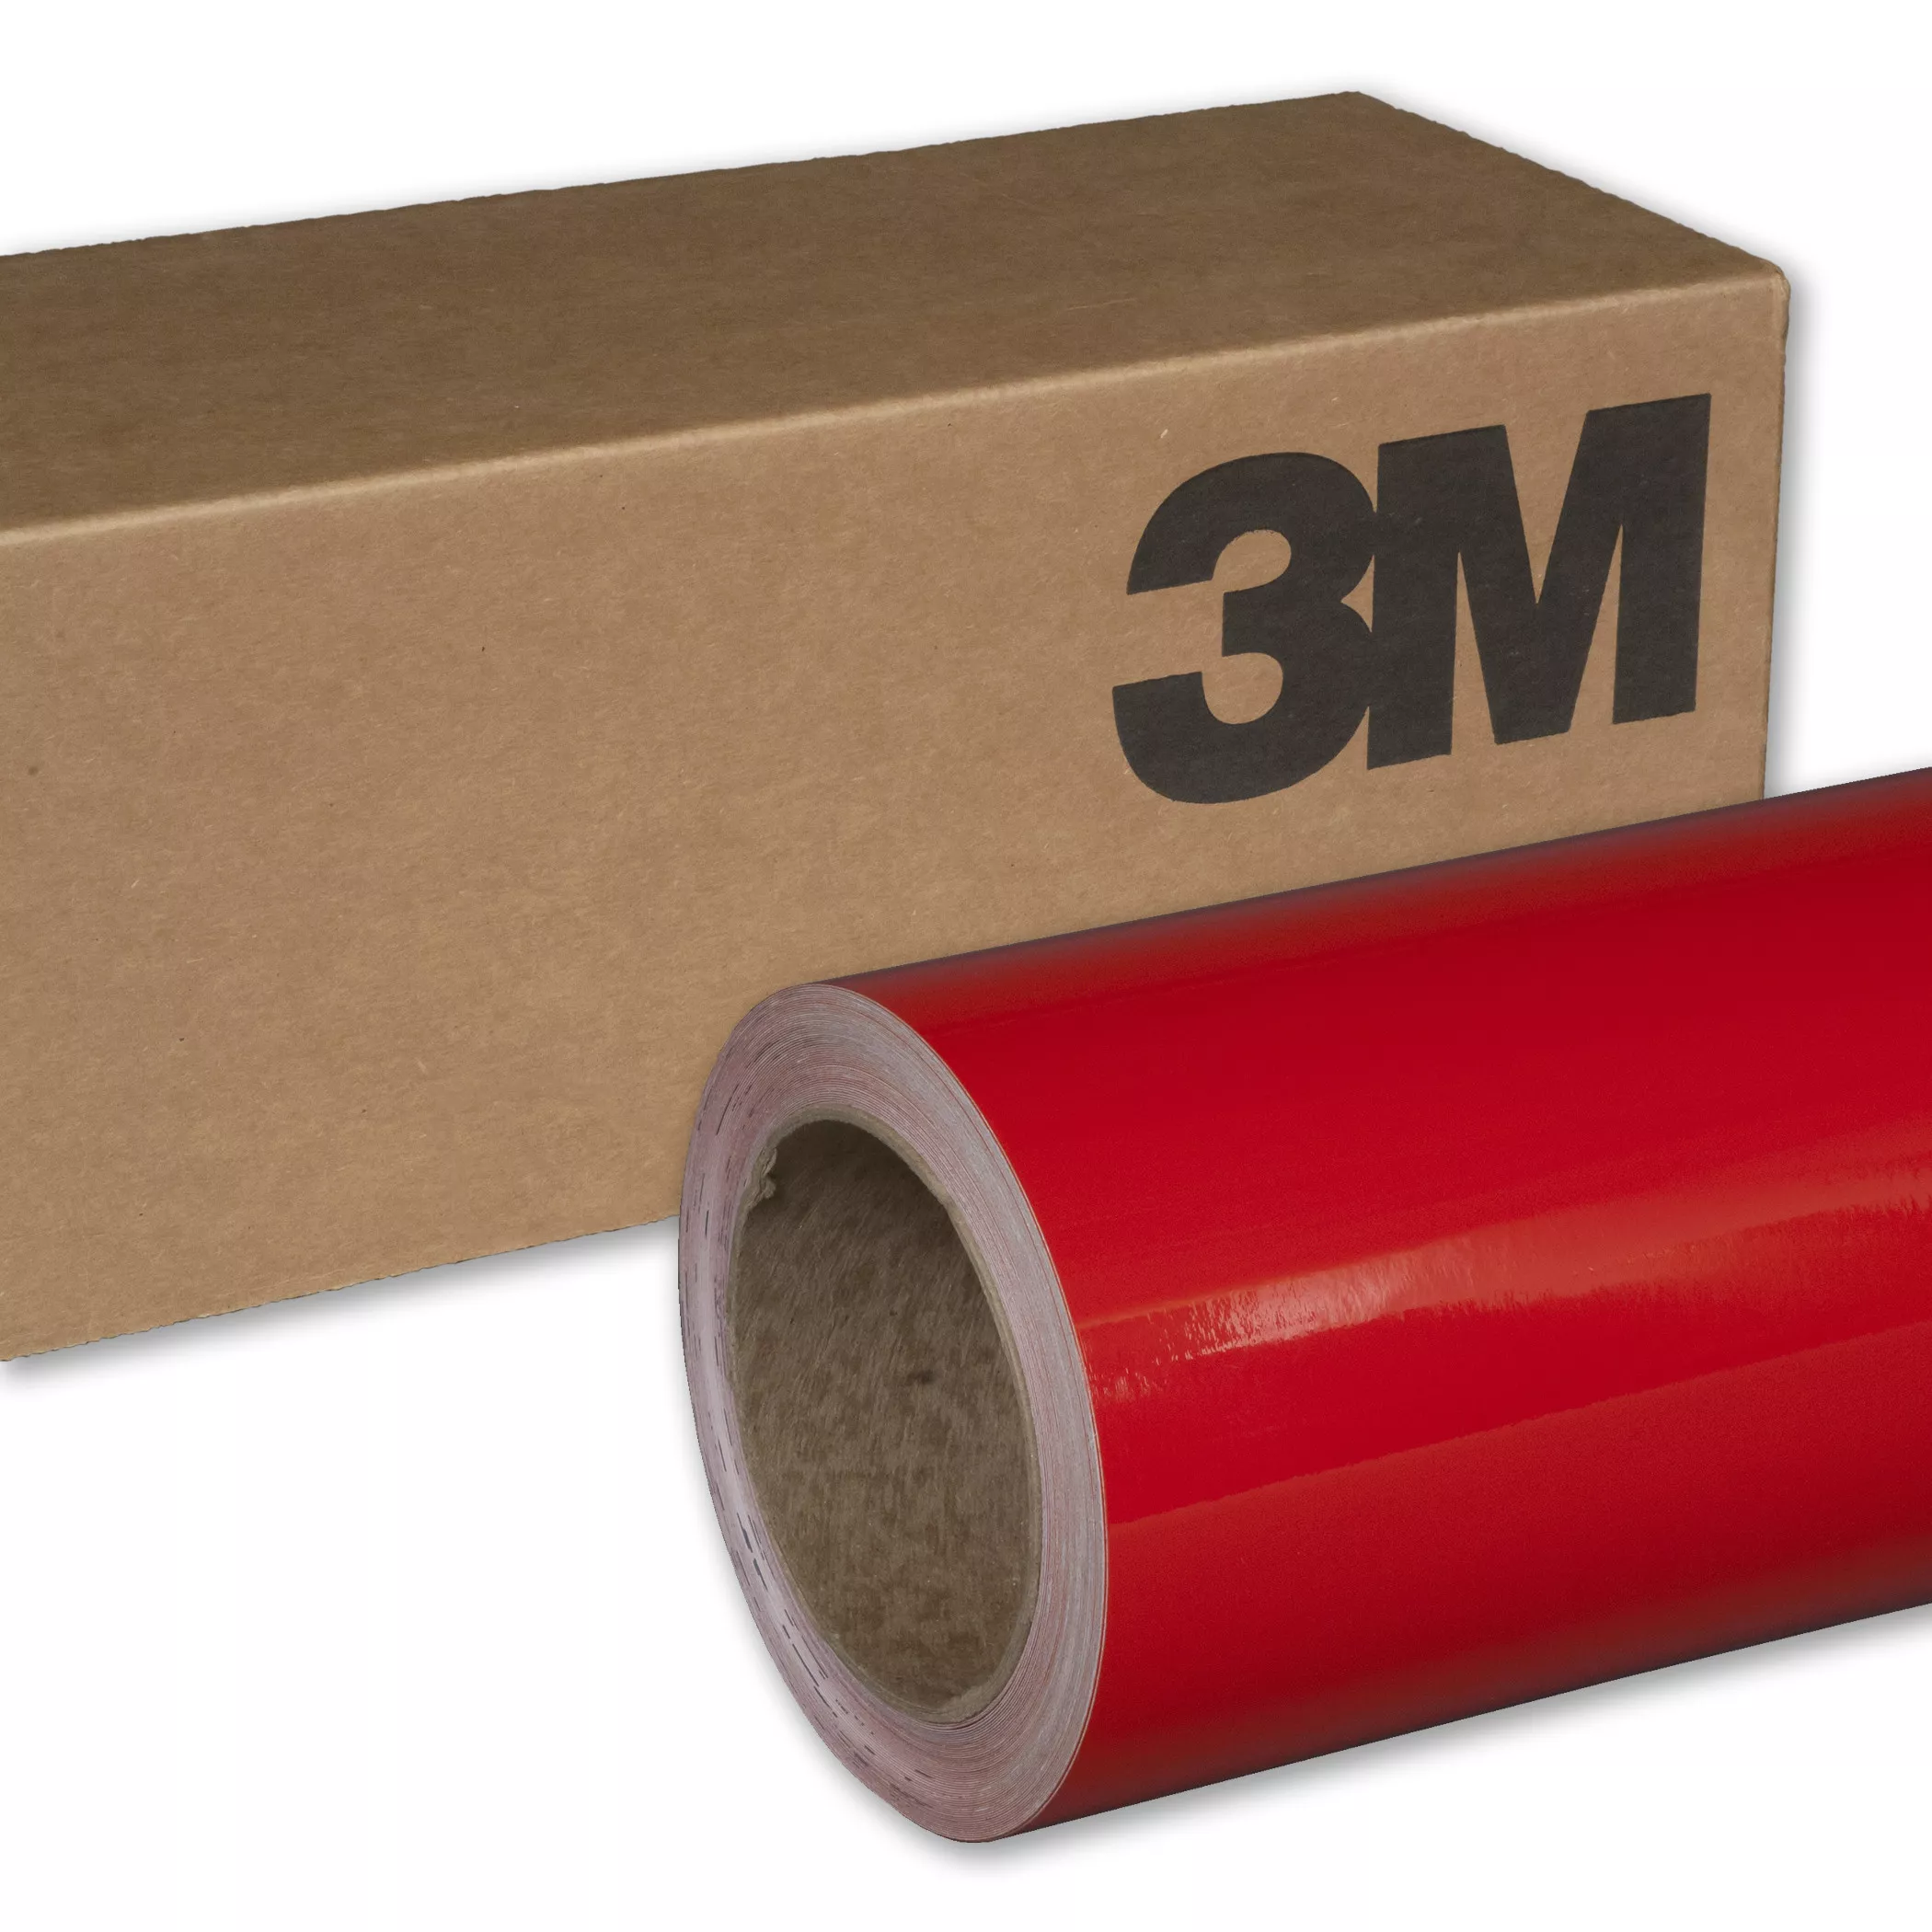 3M™ Wrap Film Series 1080-G13, Gloss Hot Rod Red, 60 in x 5 yd